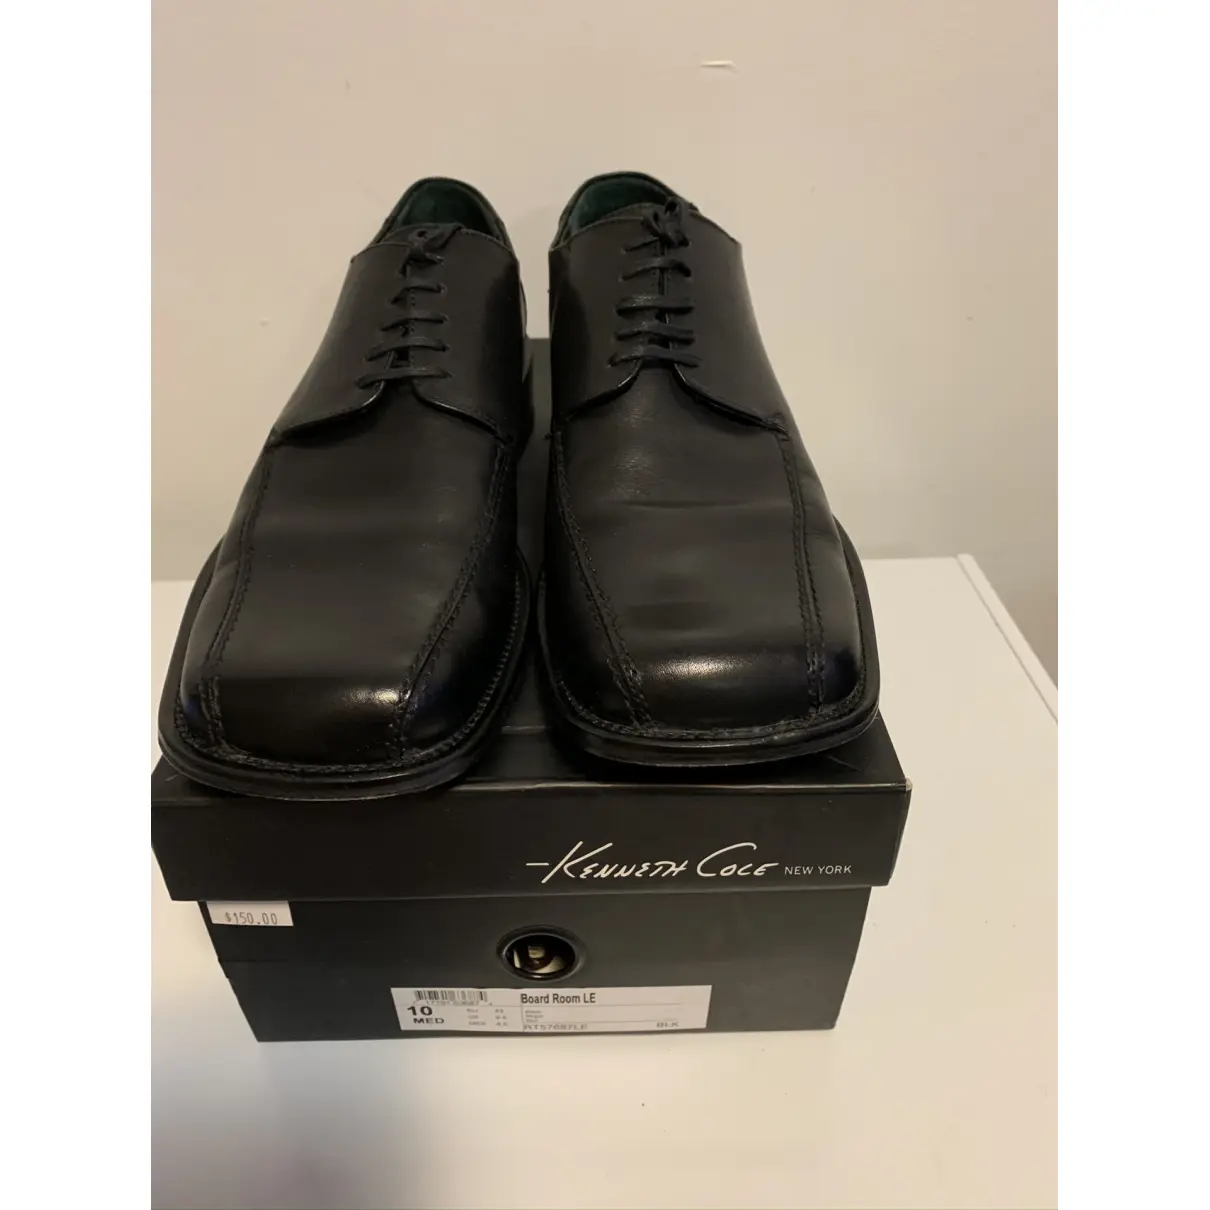 Buy Kenneth Cole Leather lace ups online